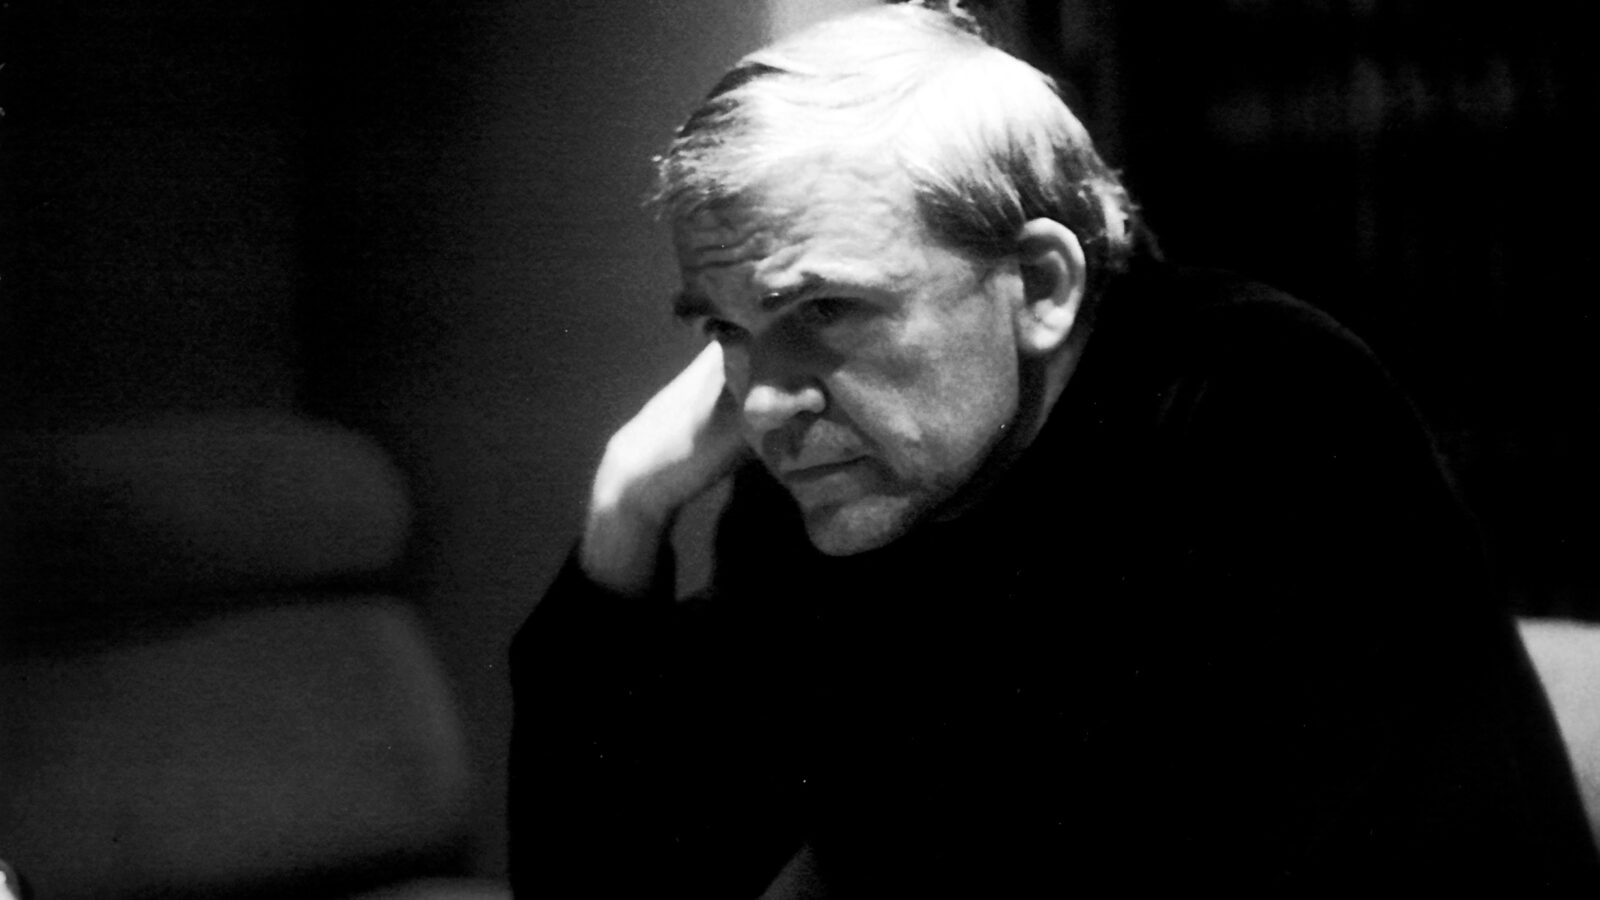 Black and white photo of Milan Kundera, seated and deep in thought